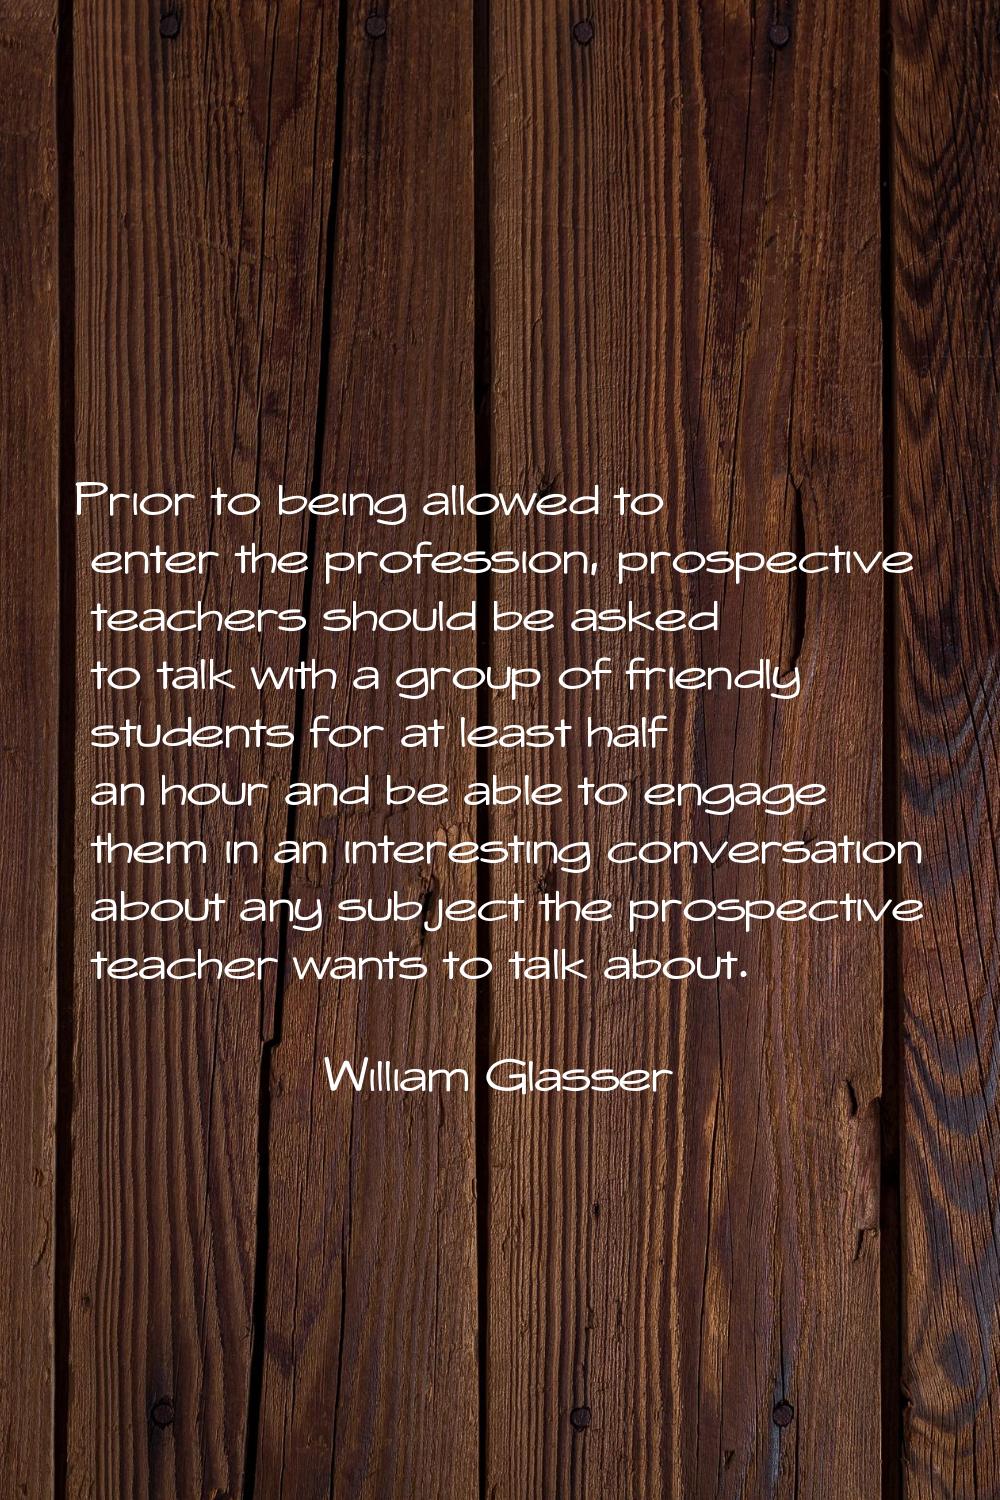 Prior to being allowed to enter the profession, prospective teachers should be asked to talk with a